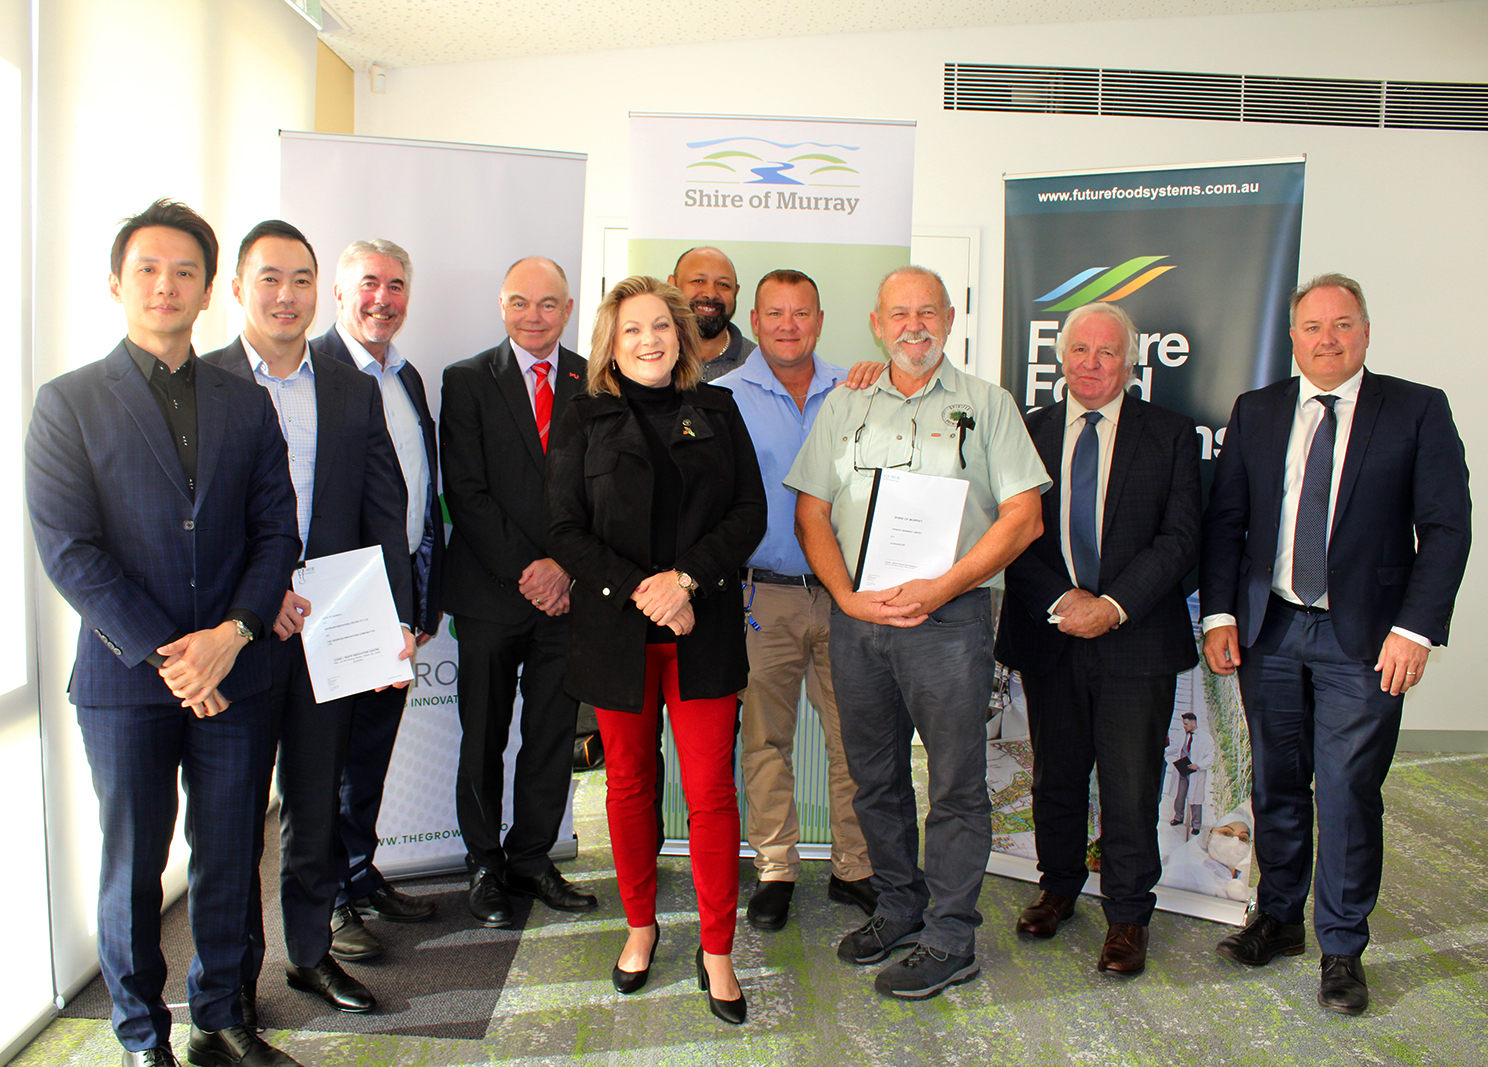 On 4 May, CRC stakeholders met at the soon-to-be-completed Food Innovation Precinct Western Australia (the Precinct) in the Shire of Murray to sign lease agreements for core facilities within the precinct.